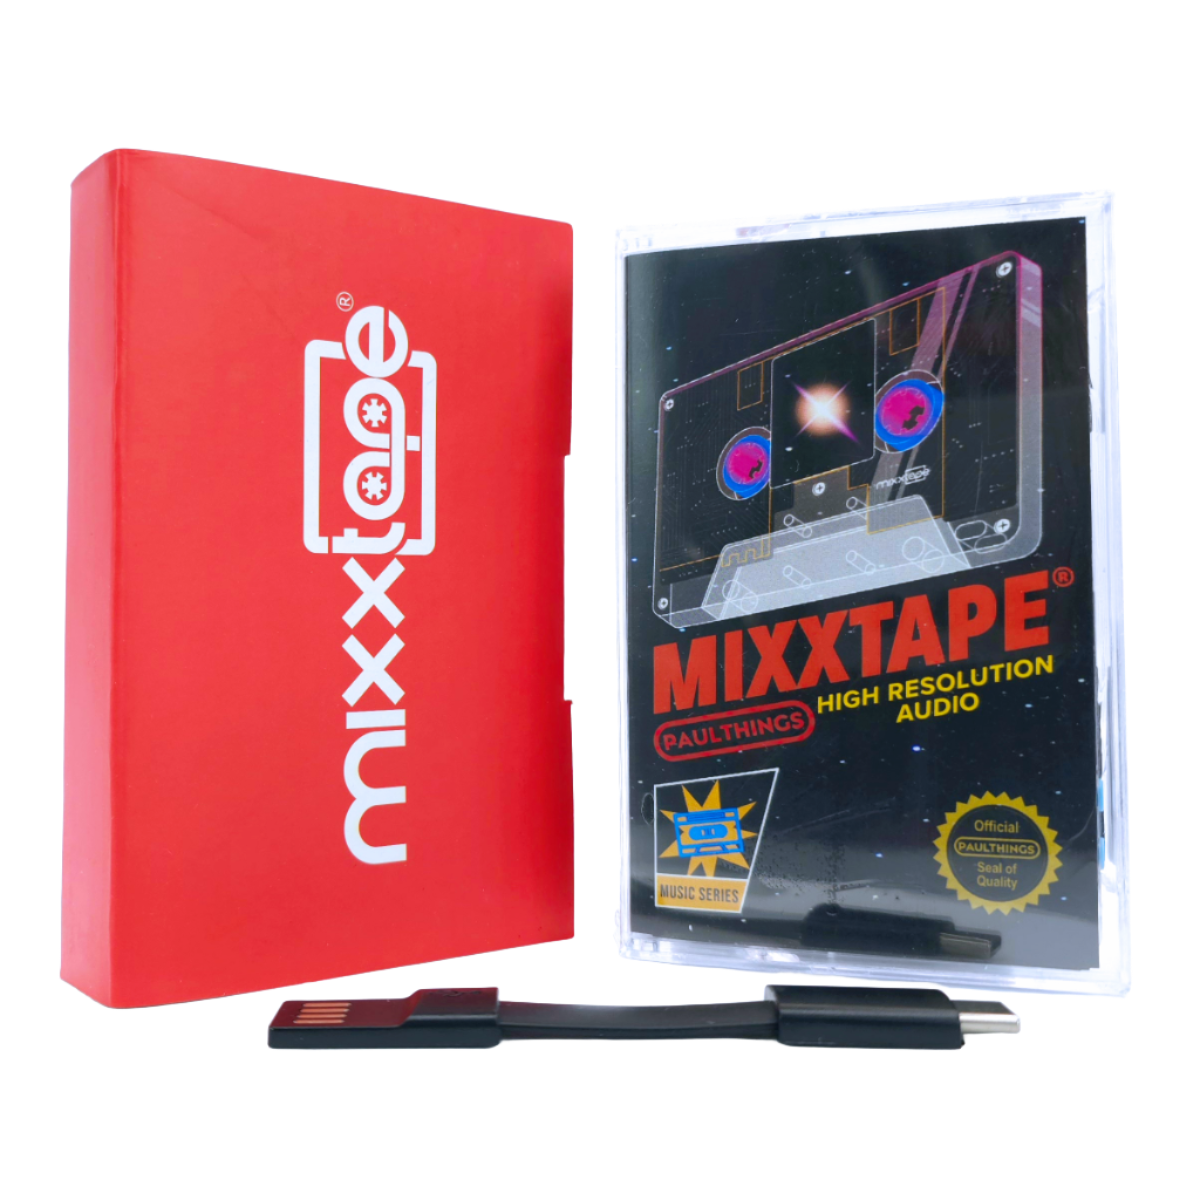 Mixxtape: A kickass music player now available on a flash sale for $45. Limited time!